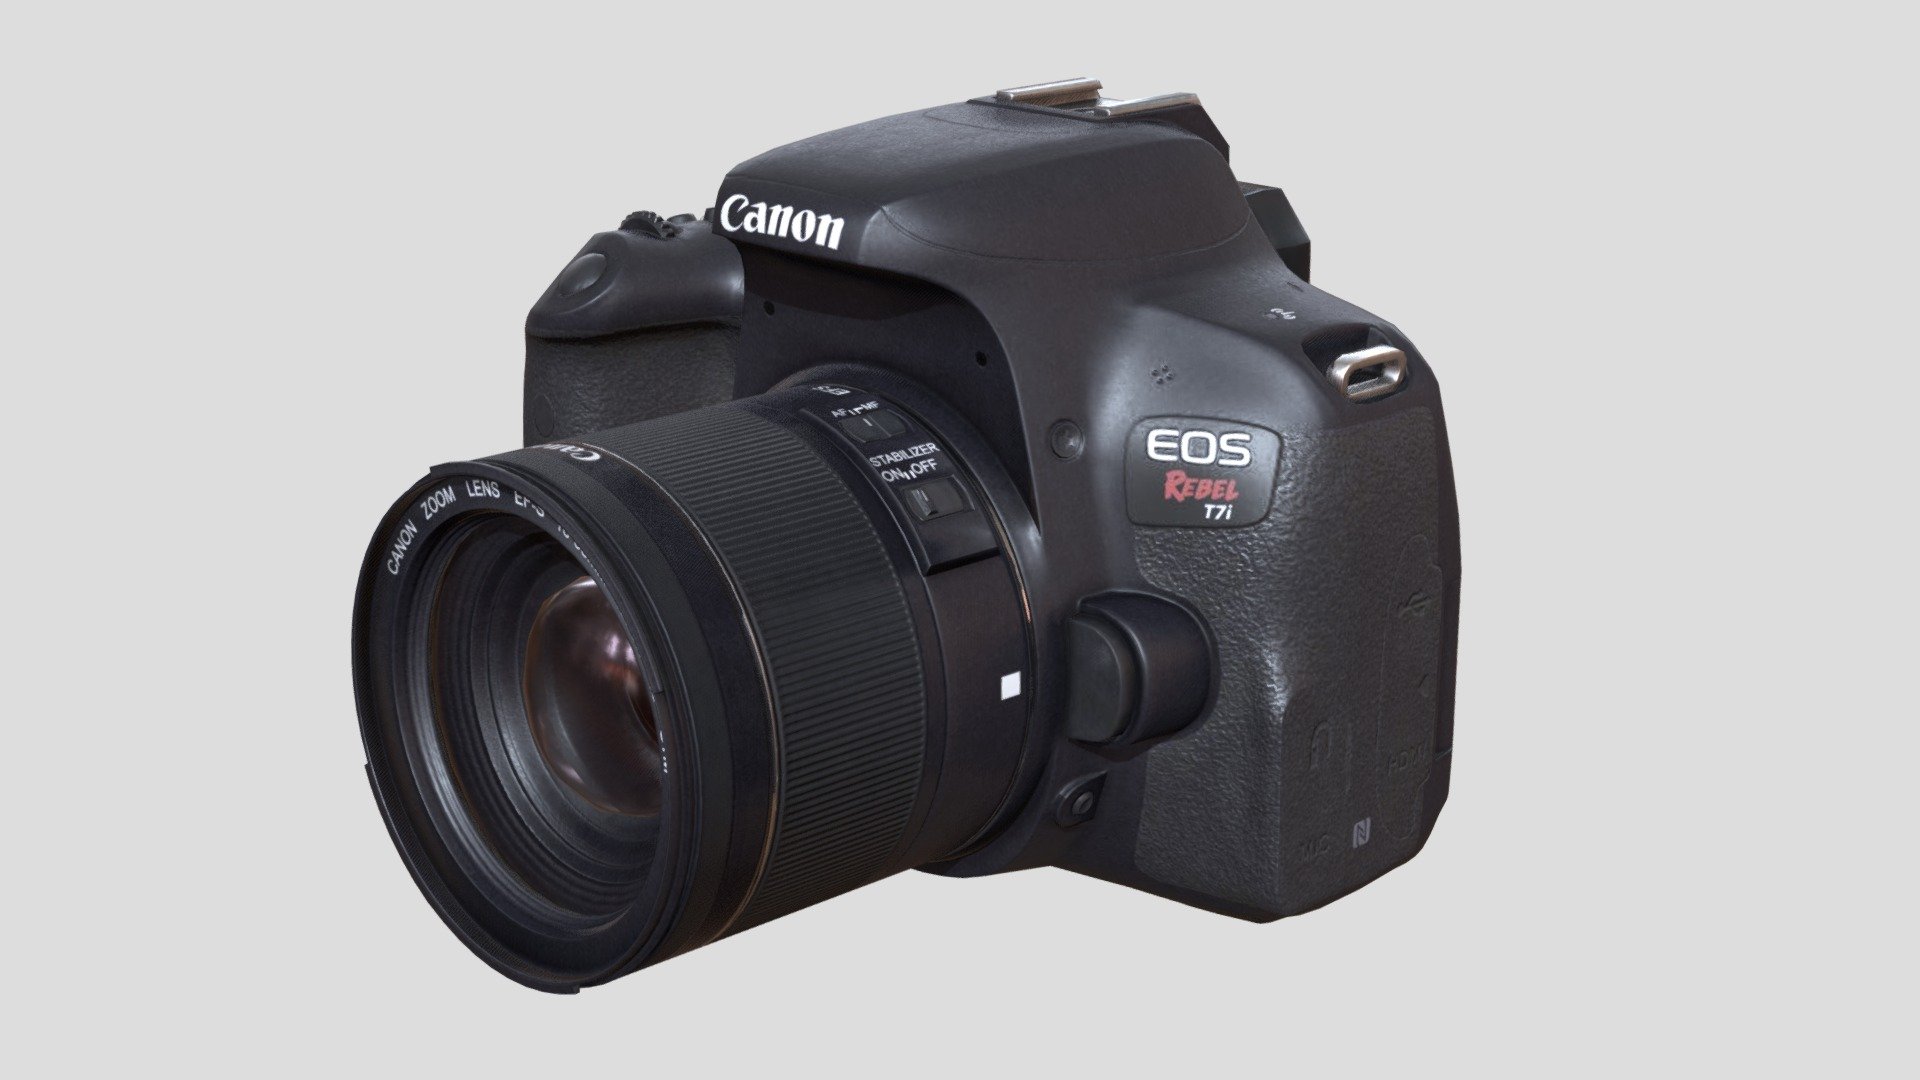 Canon T7i 800D DSLR Camera is an optimized model with excellent texturing for best outcome.

The model has an optimized low poly mesh with the greatest possible number of simplifications that do not affect photo-realism but can help to simplify it, thus lightening your scene and allowing for using this model in real-time 3d applications.

In this product, all objects are ERROR-FREE. All LEGAL Geometry. Subdivisions are not required for this product. Real-world accurate model.


Format Type



3ds Max 2017 (Standard Material)

FBX

OBJ

3DS


Texture Type



Diffuse

Specular

Glossiness

Normal

Alpha

AO

You might need to re-assign textures map to model in your relevant software

You might need to flip green channel of Normal map according to your relevant softwar - Canon T7i 800D DSLR Camera - Buy Royalty Free 3D model by luxe3dworld 3d model